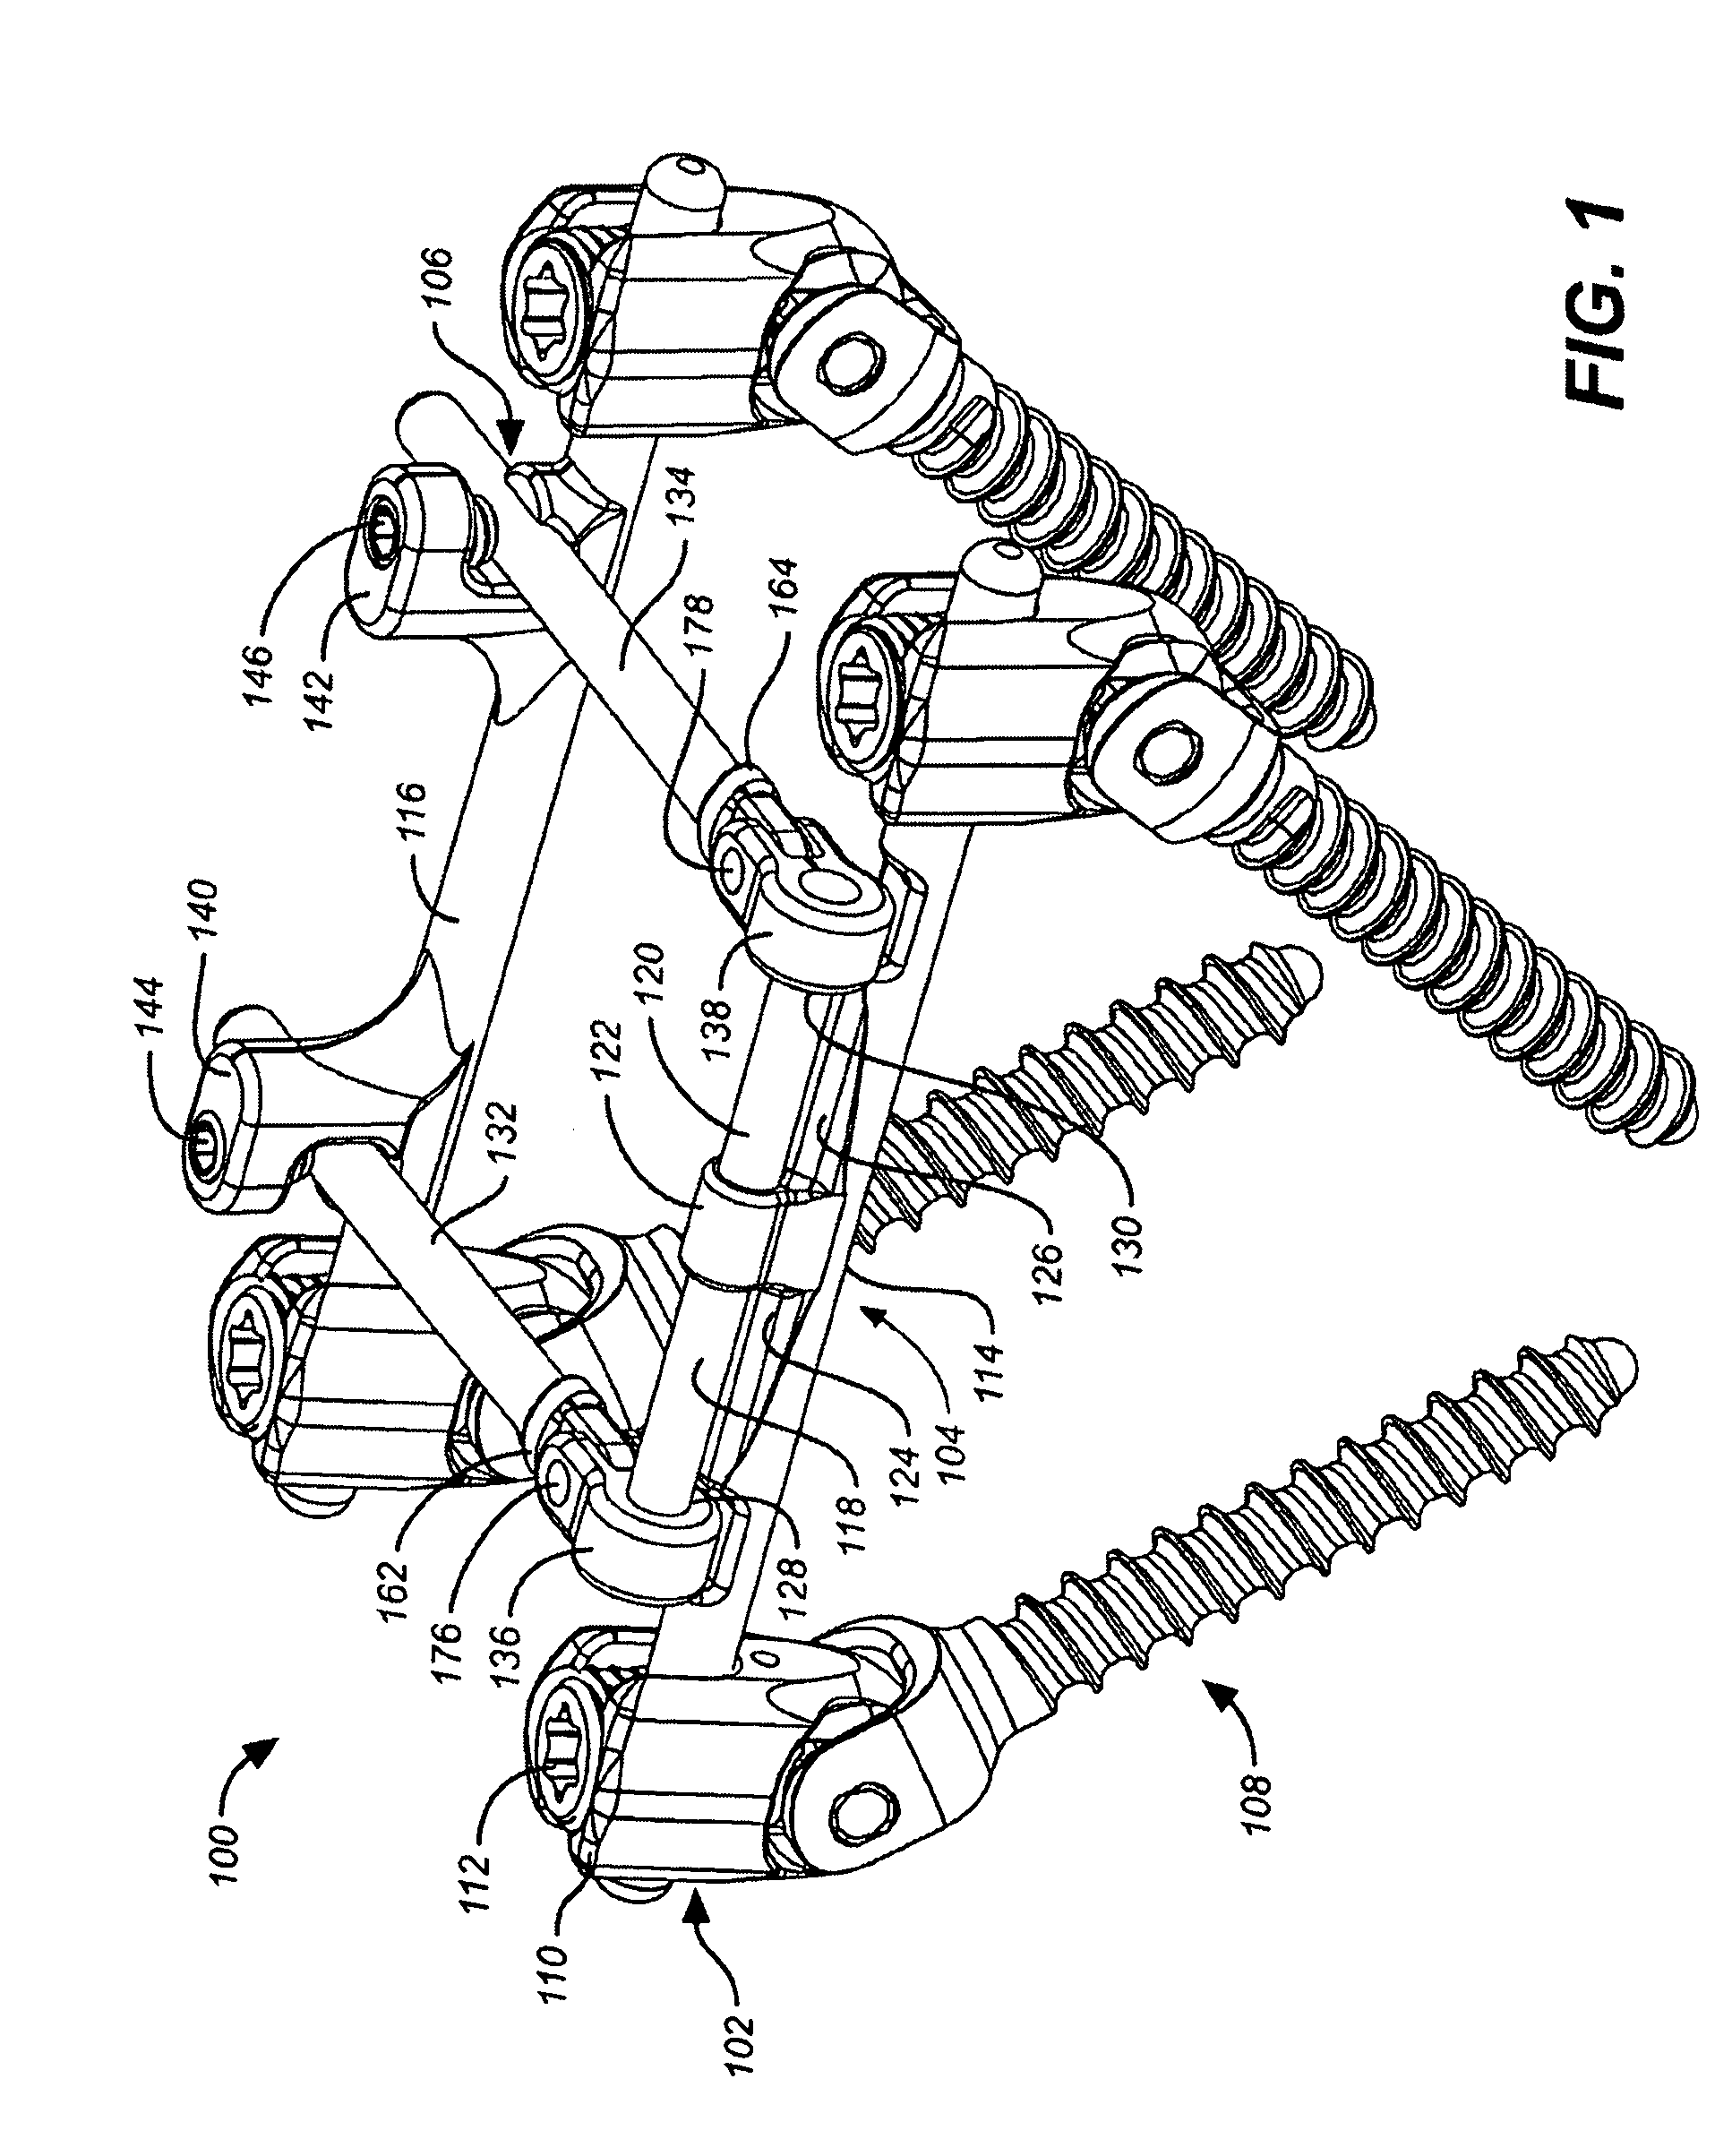 Dual deflection rod system for a dynamic stabilization and motion preservation spinal implantation system and method